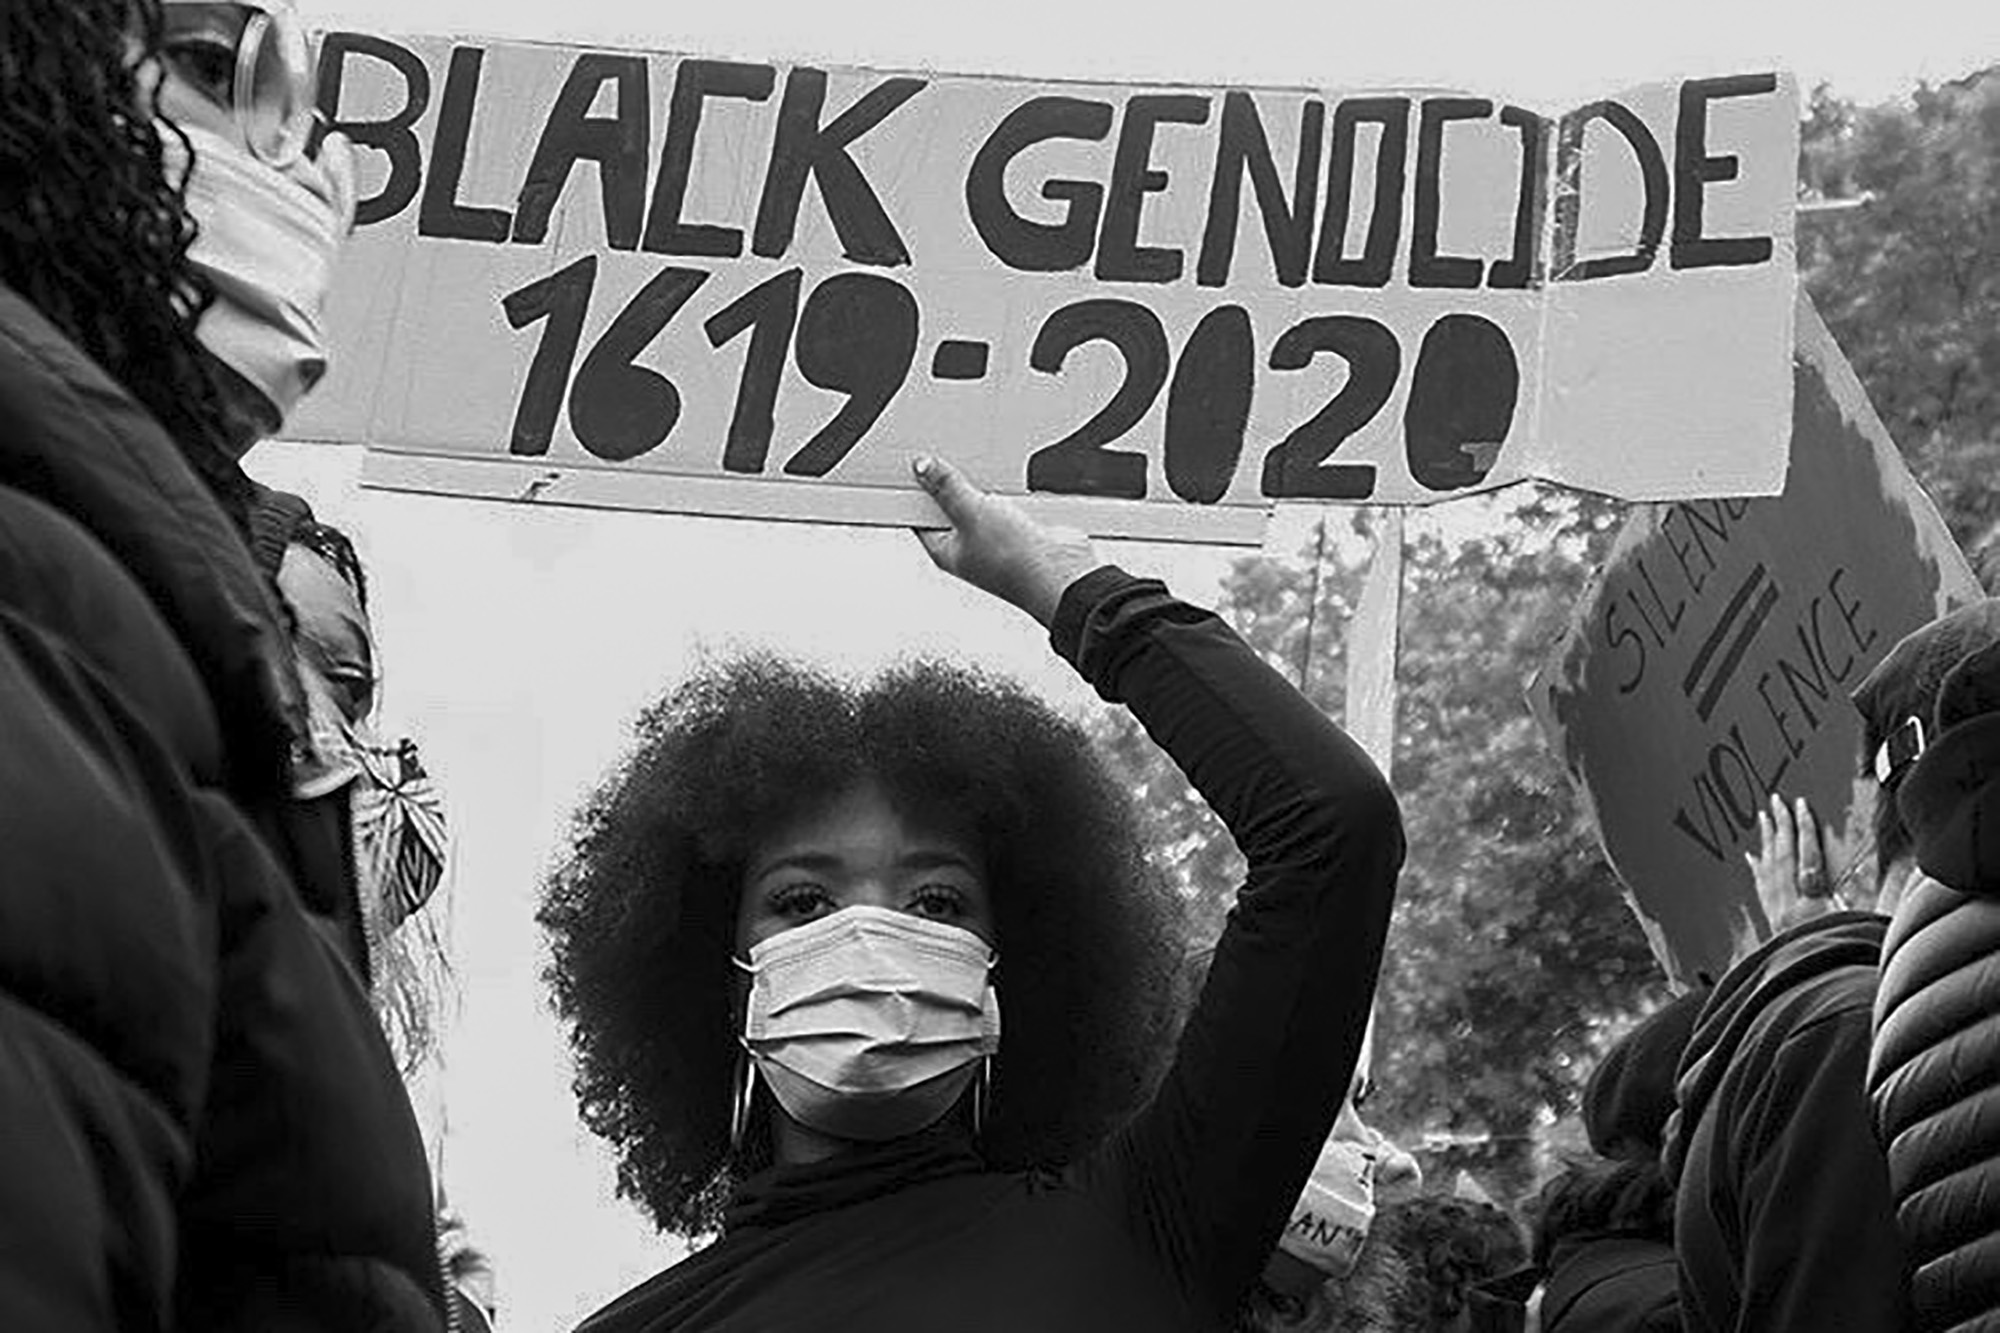 African American woman carrying a sign above their head that says Black Genocide 1619-2020